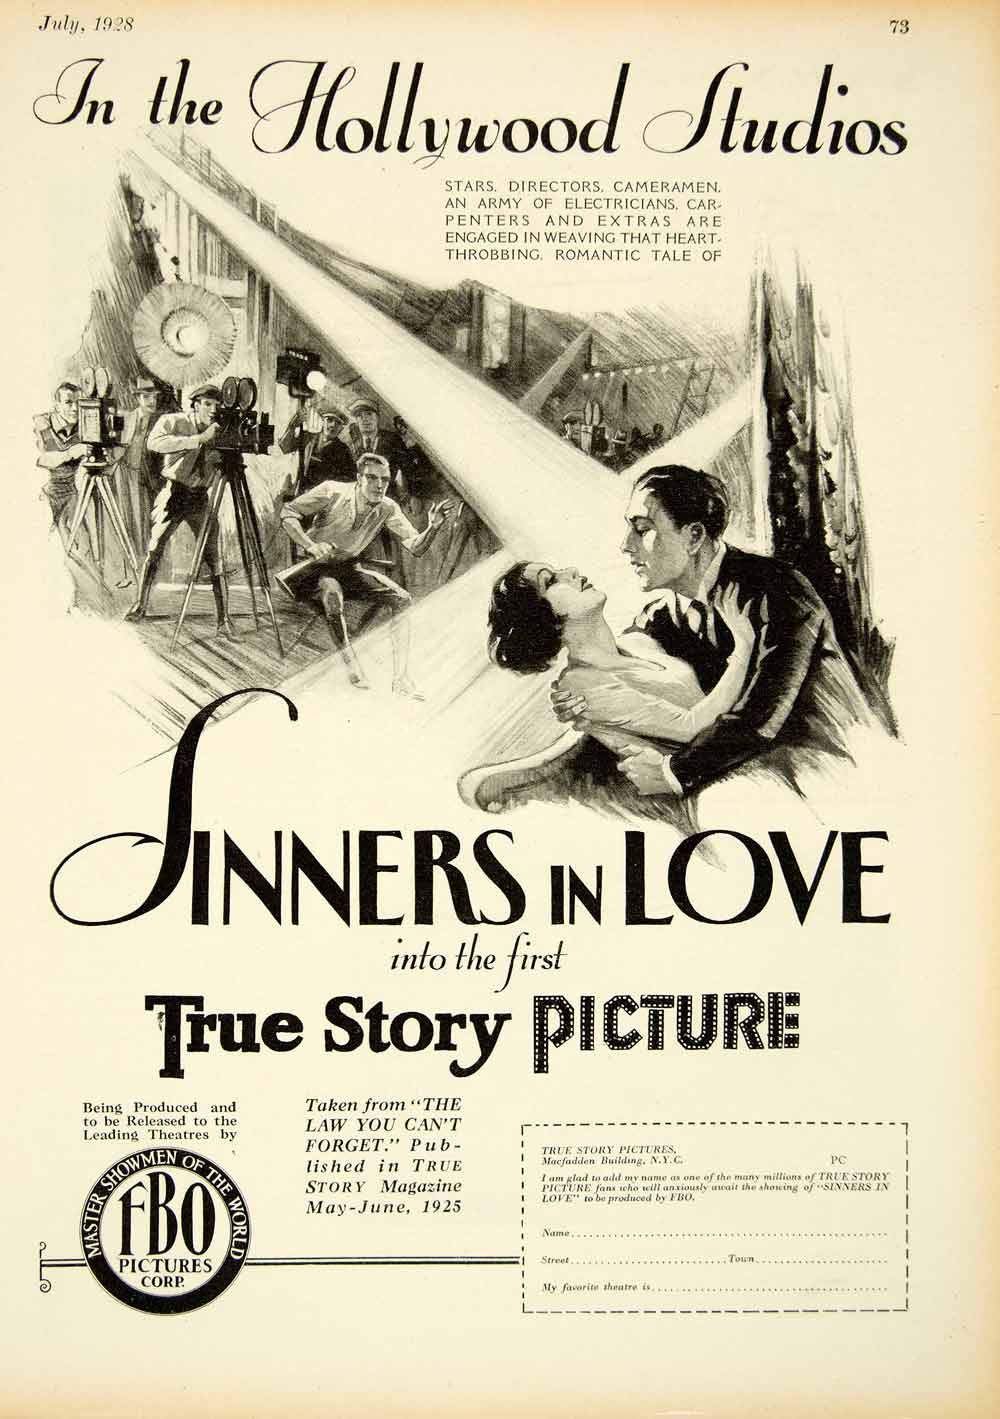 1928 Ad Sinners Love FBO Pictures Corp Macfadden Building New York True YPC1